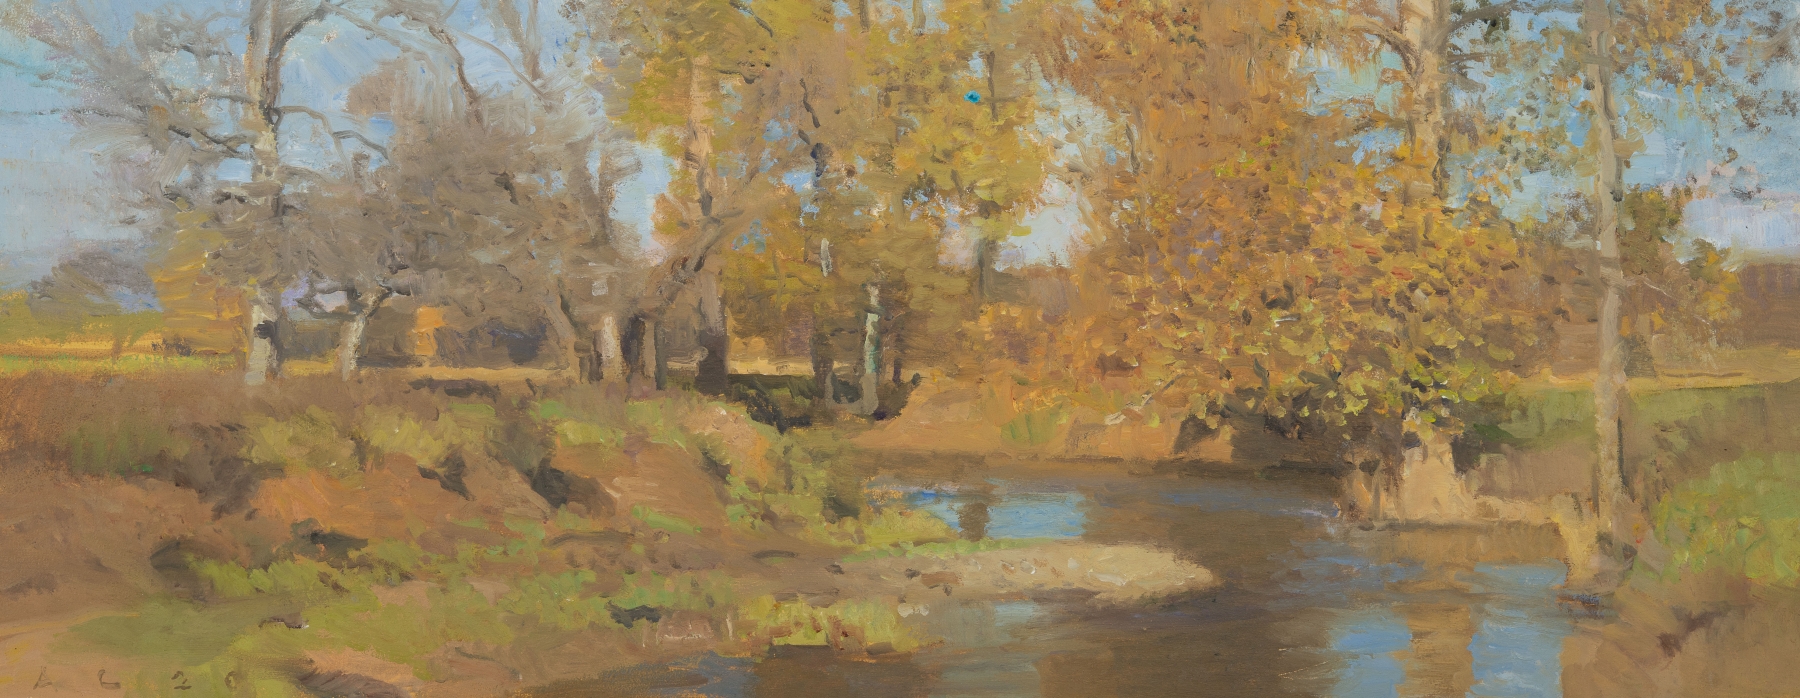 Swoope Fall I, 8&quot; x 20.25&quot;